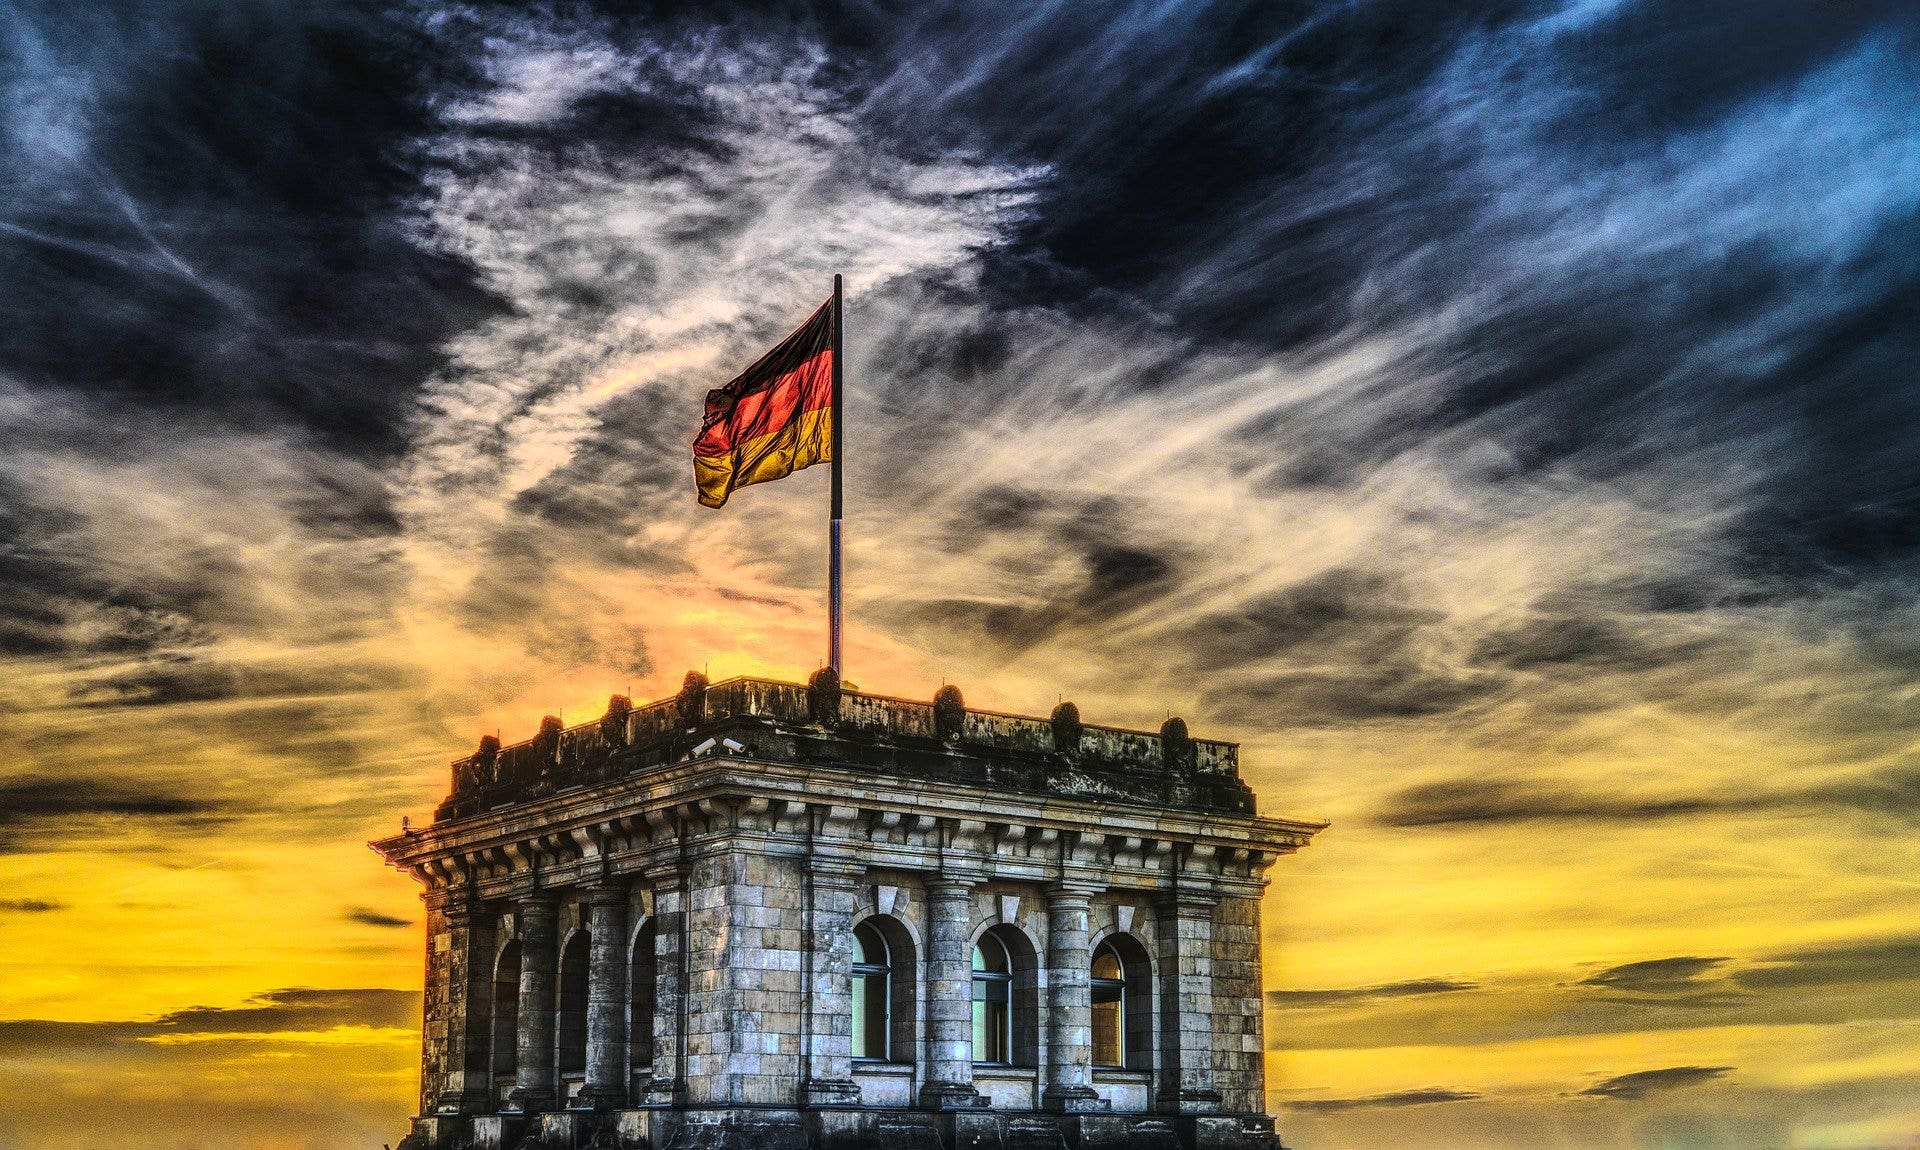 International Cannabis Update: Germany Record Imports, Thailand Encourages Cultivation, Norway Drug Decriminalization